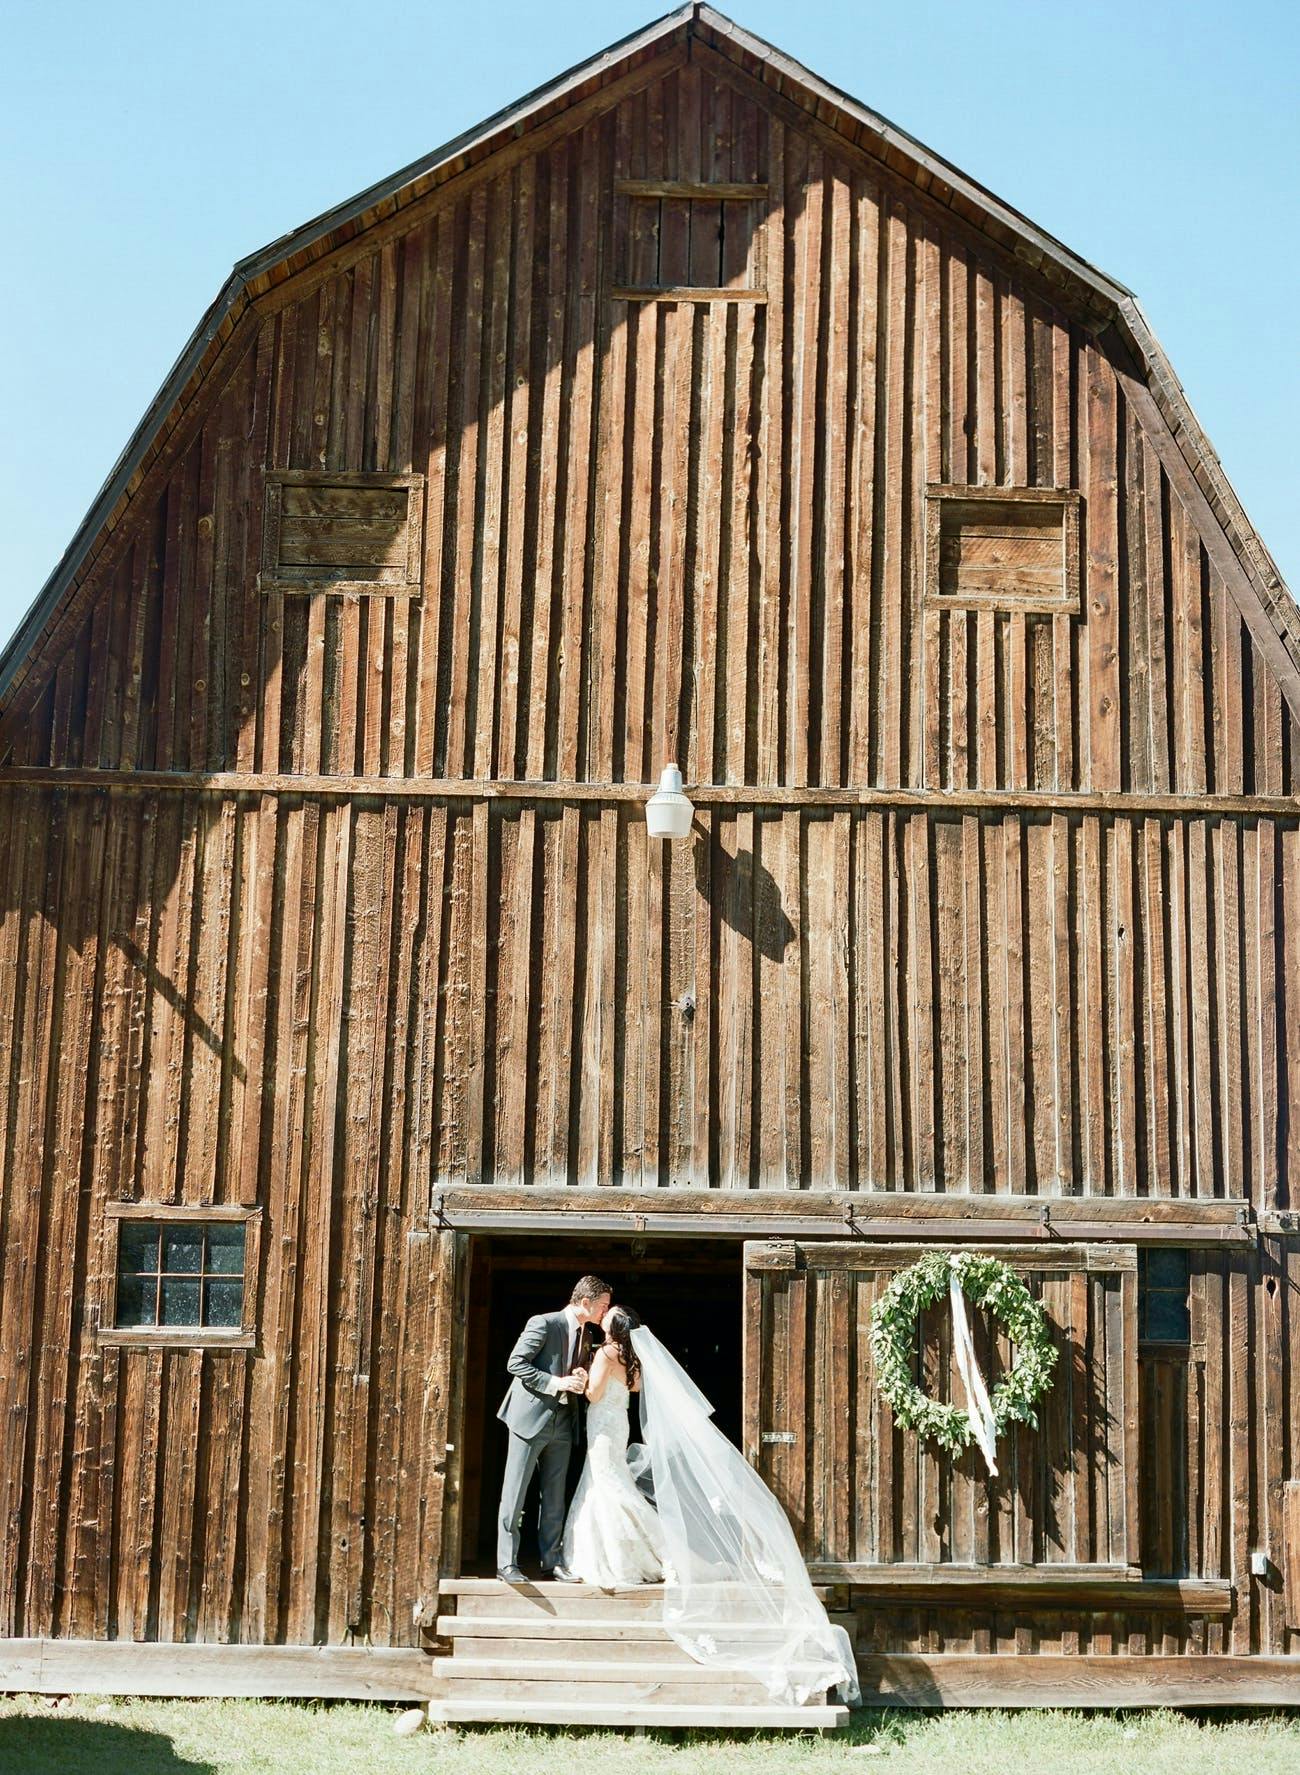 Bride and groom kiss near rustic barn for wedding photo op | PartySlate